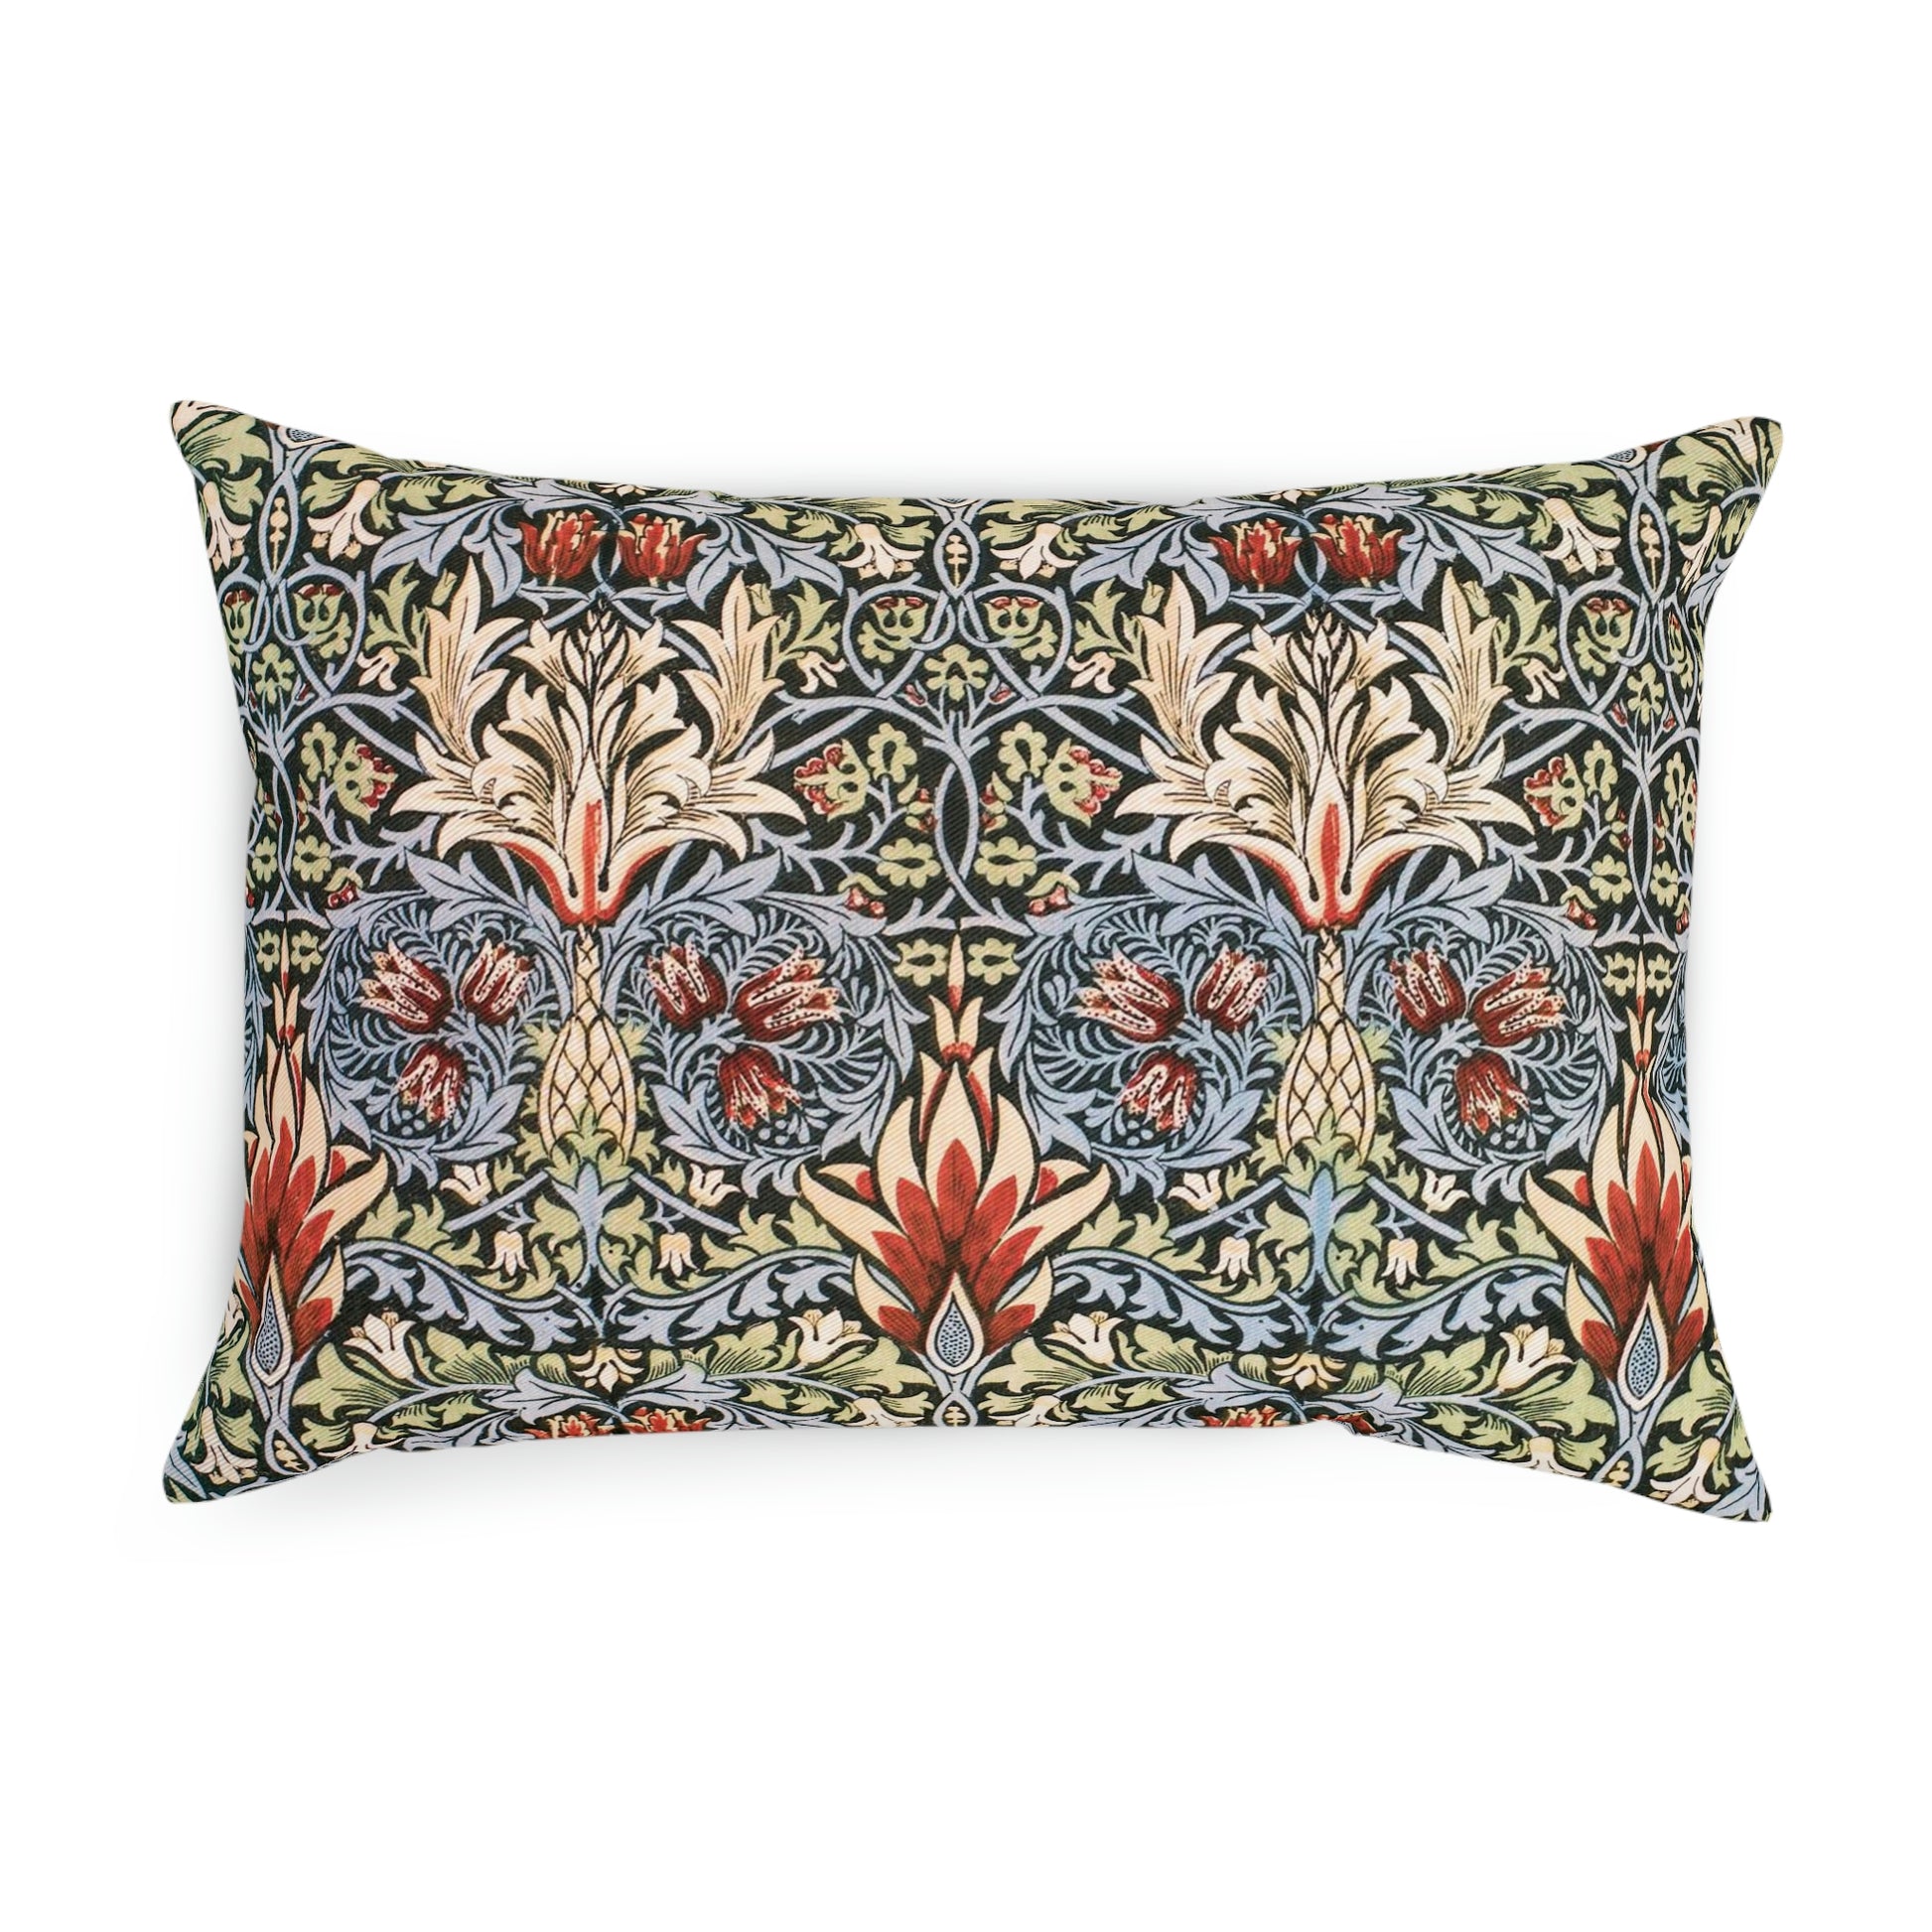 William-Morris-and-Co-Cushion-and-Cushion-Cover-Snakeshead-Collection-12